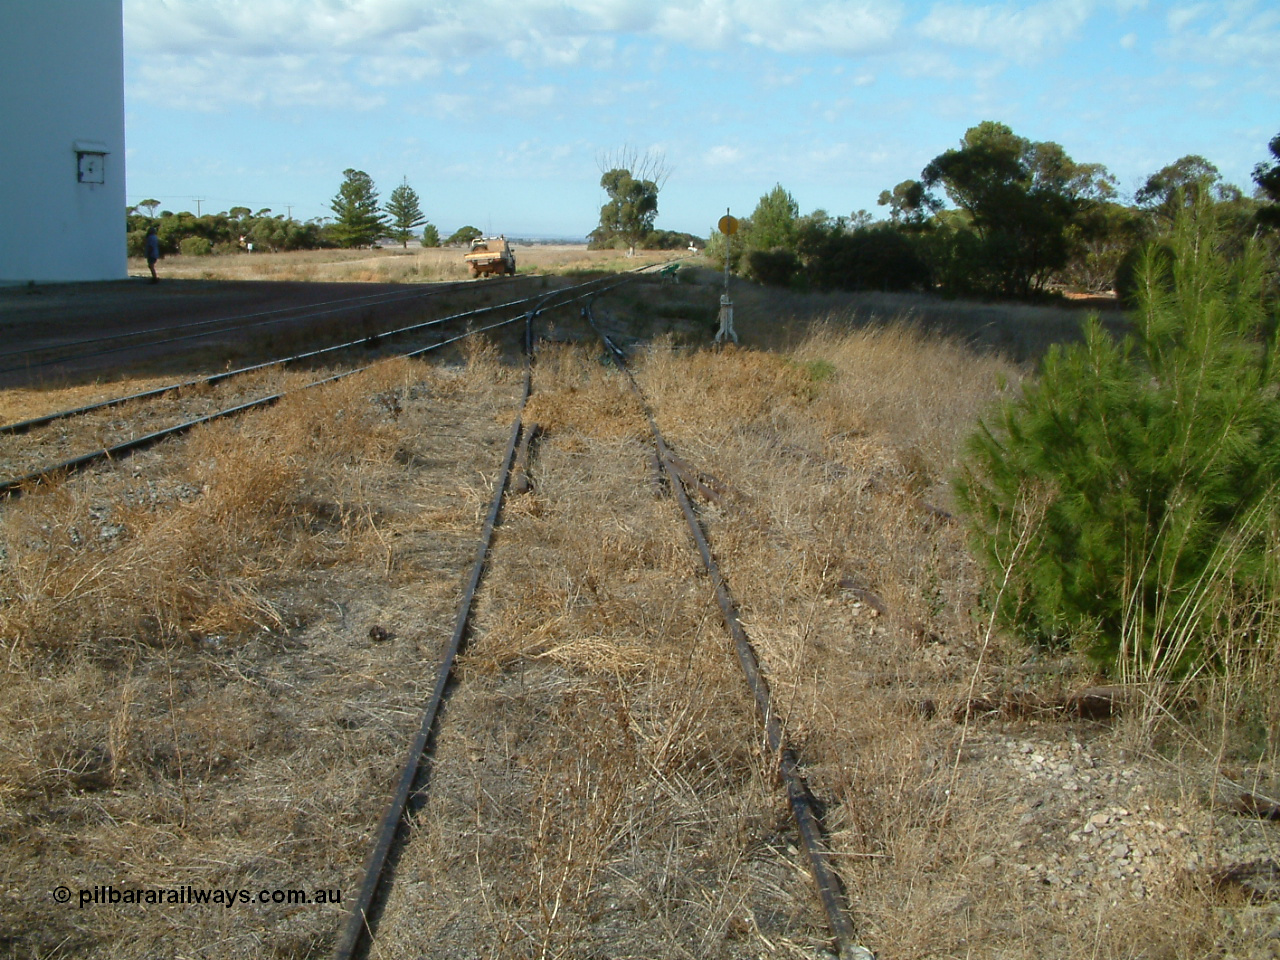 030406 092518
Yeelanna, yard view looking south from the station siding with the south leg of the triangle points, lever and indicator visible, pine tree growing between rails. 6th April 2003.
